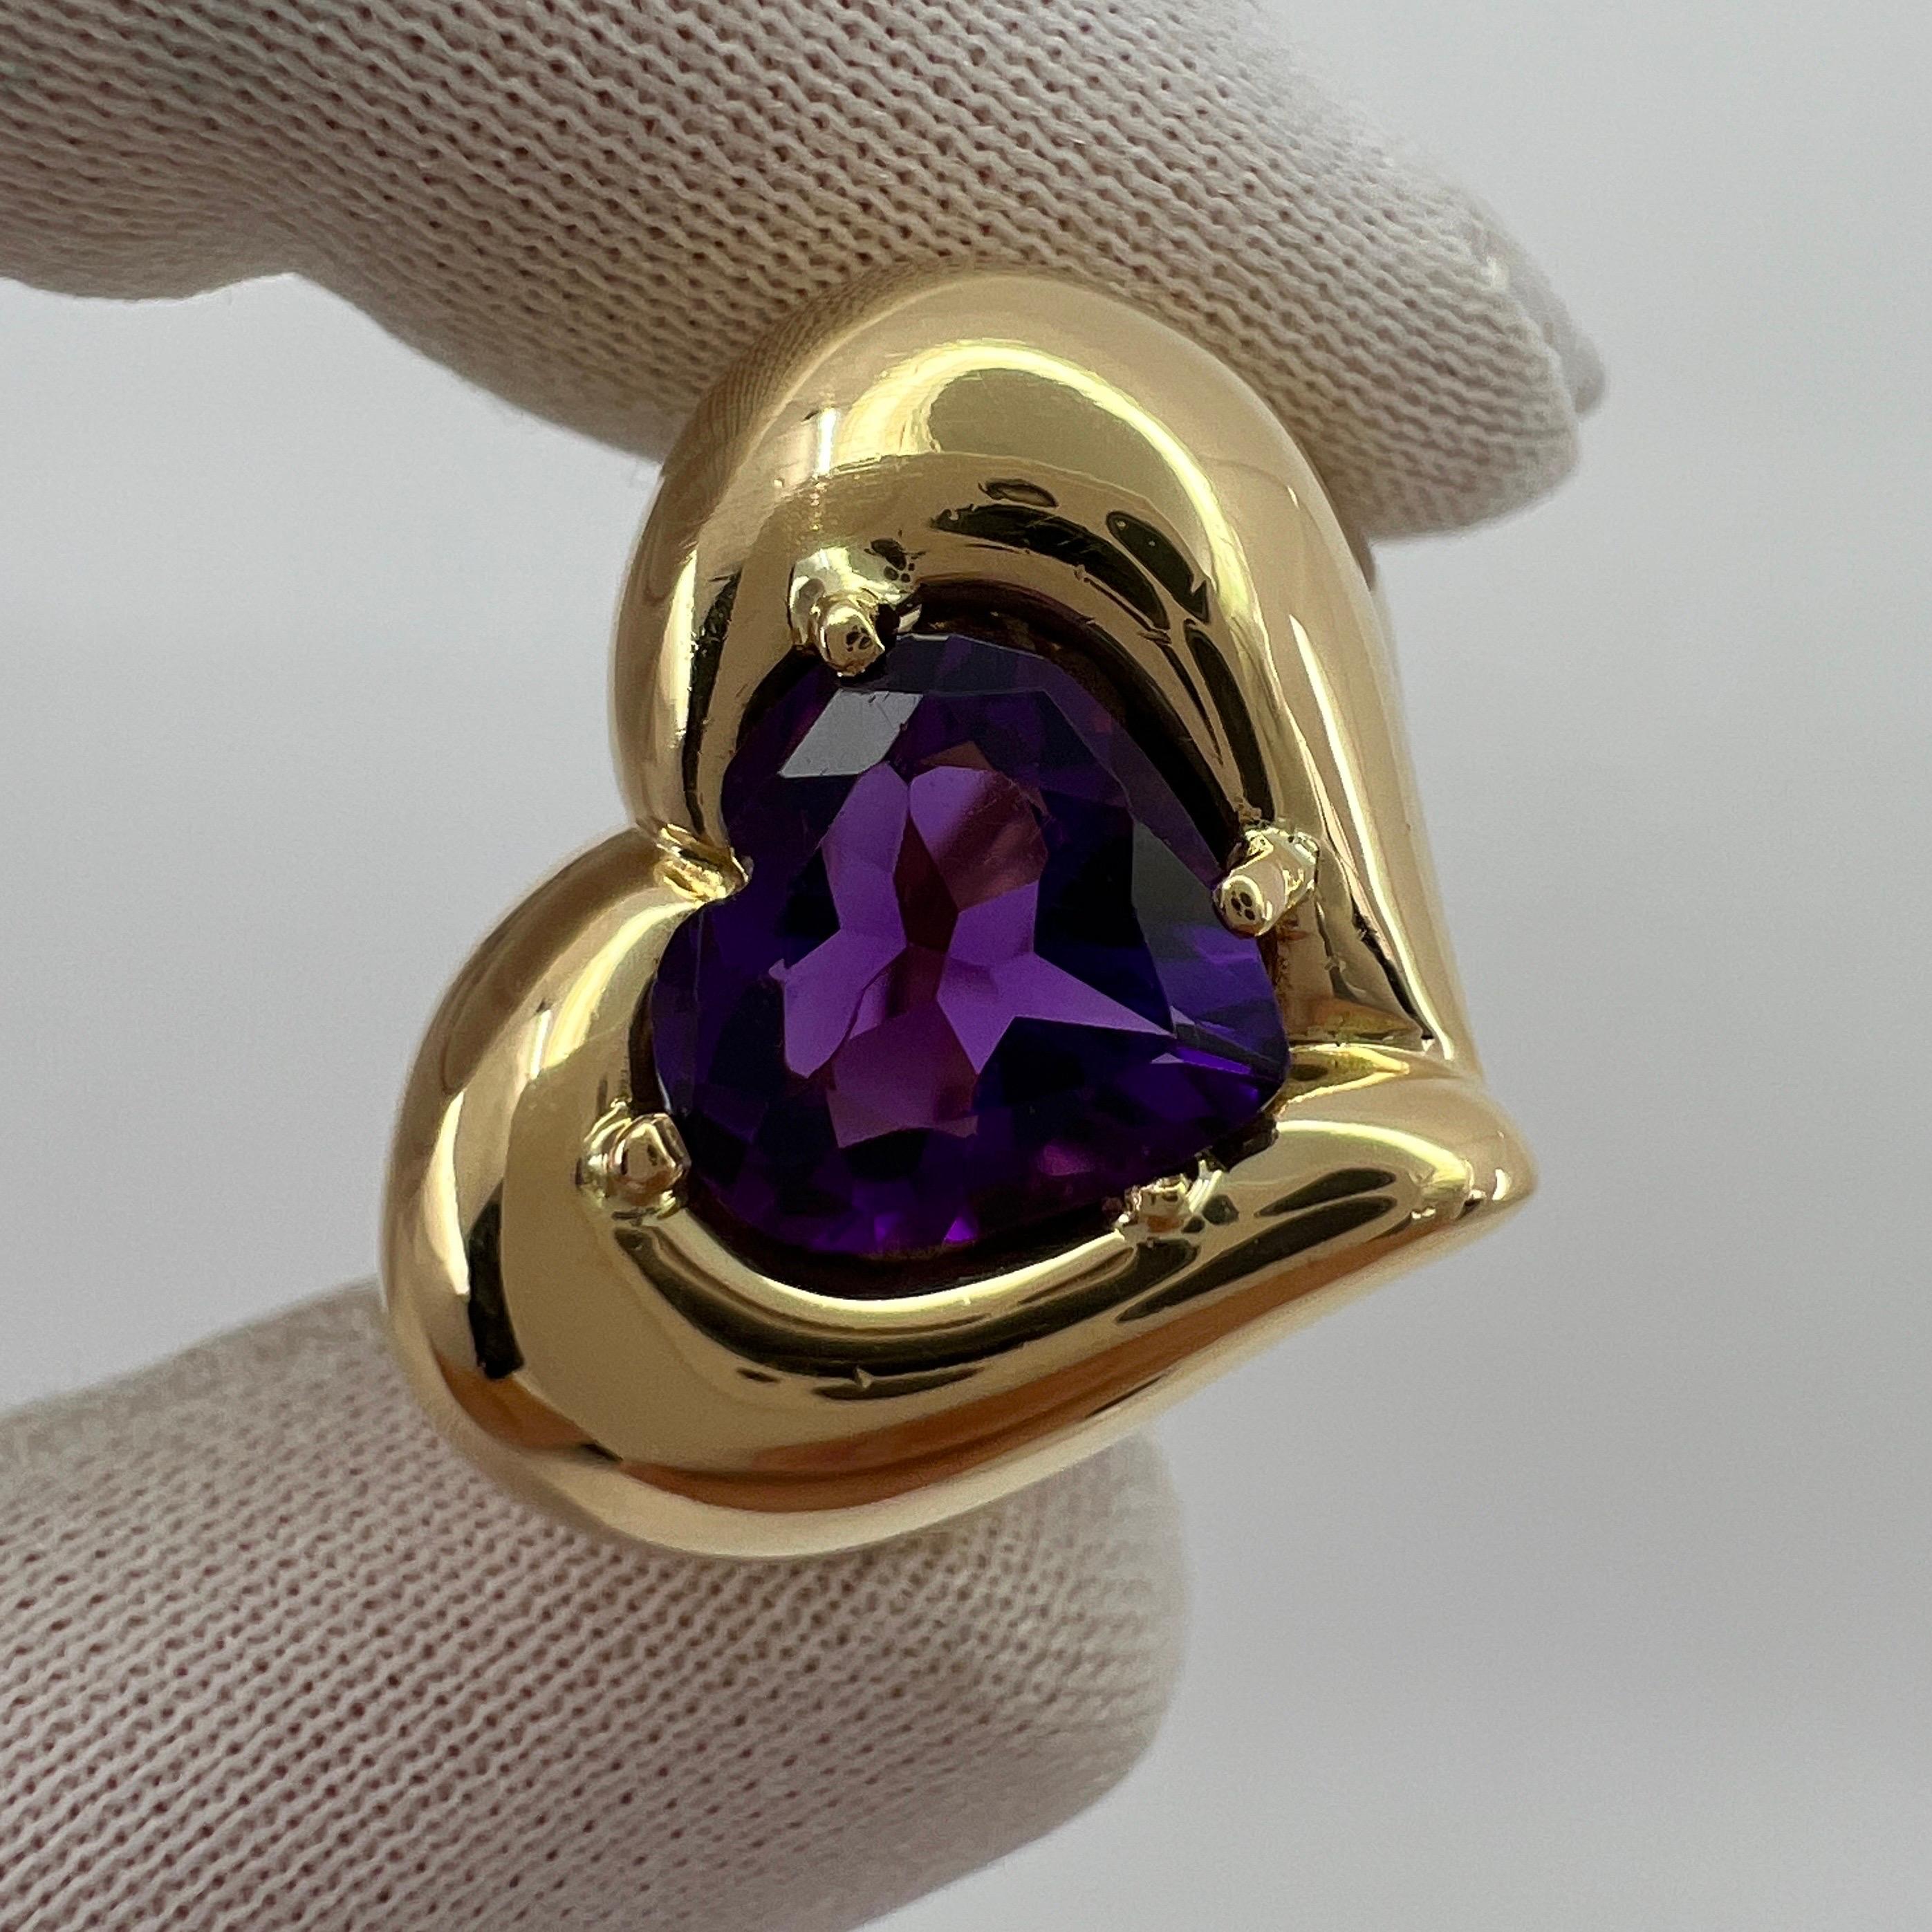 Heart Cut Rare Vintage Van Cleef & Arpels 18k Yellow Gold Amethyst Heart Ring with Box